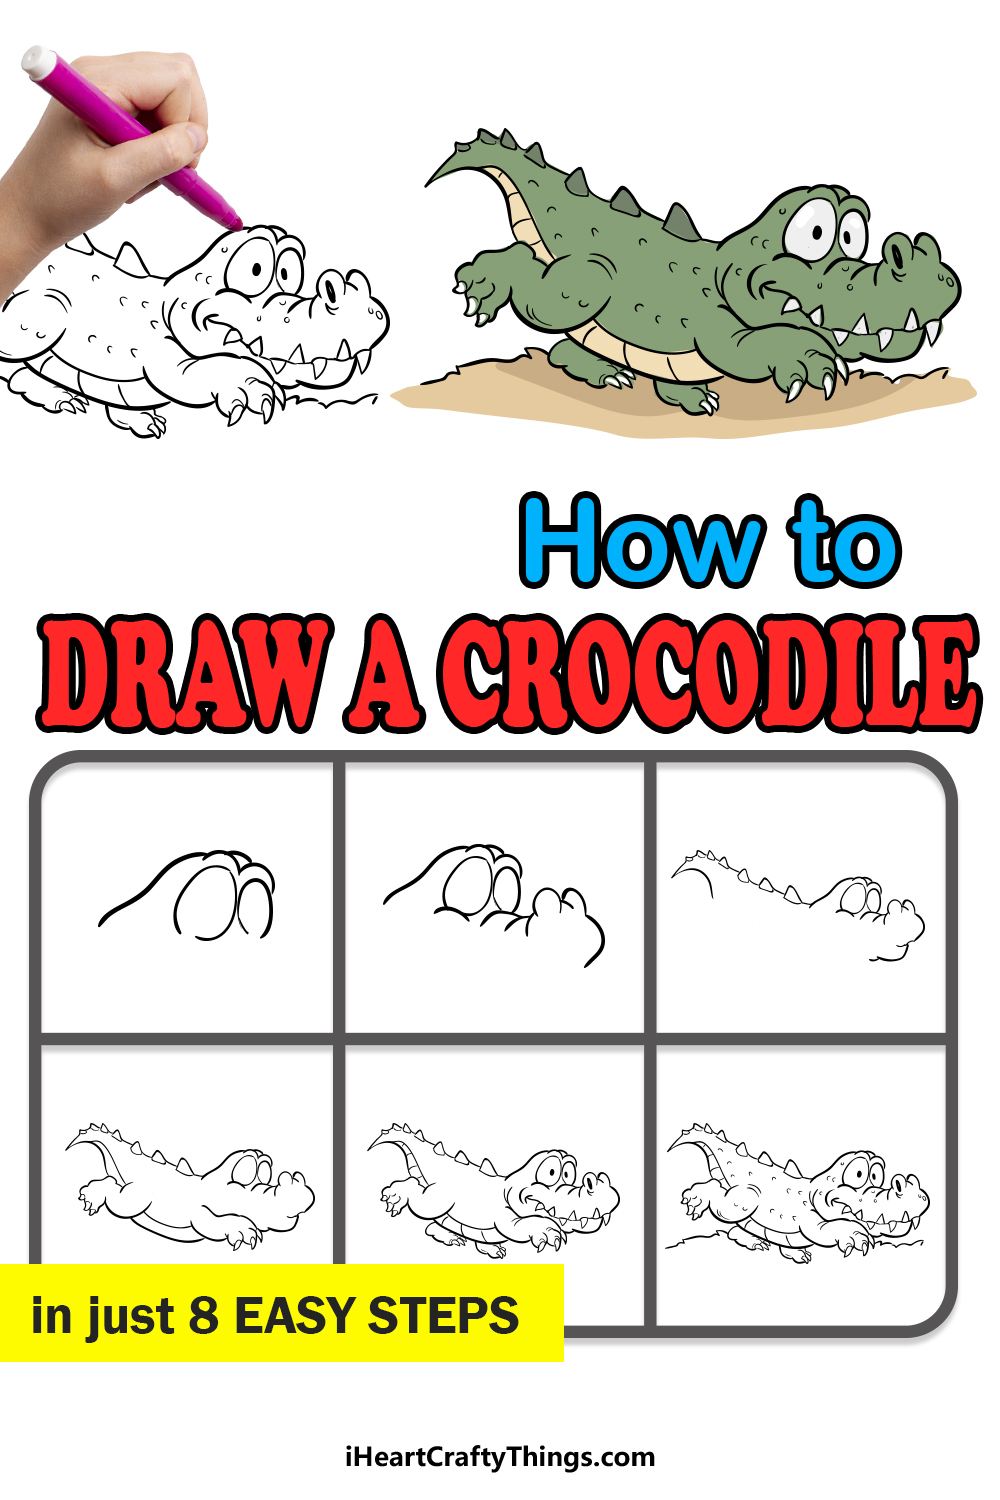 how to draw a crocodile in 8 easy steps